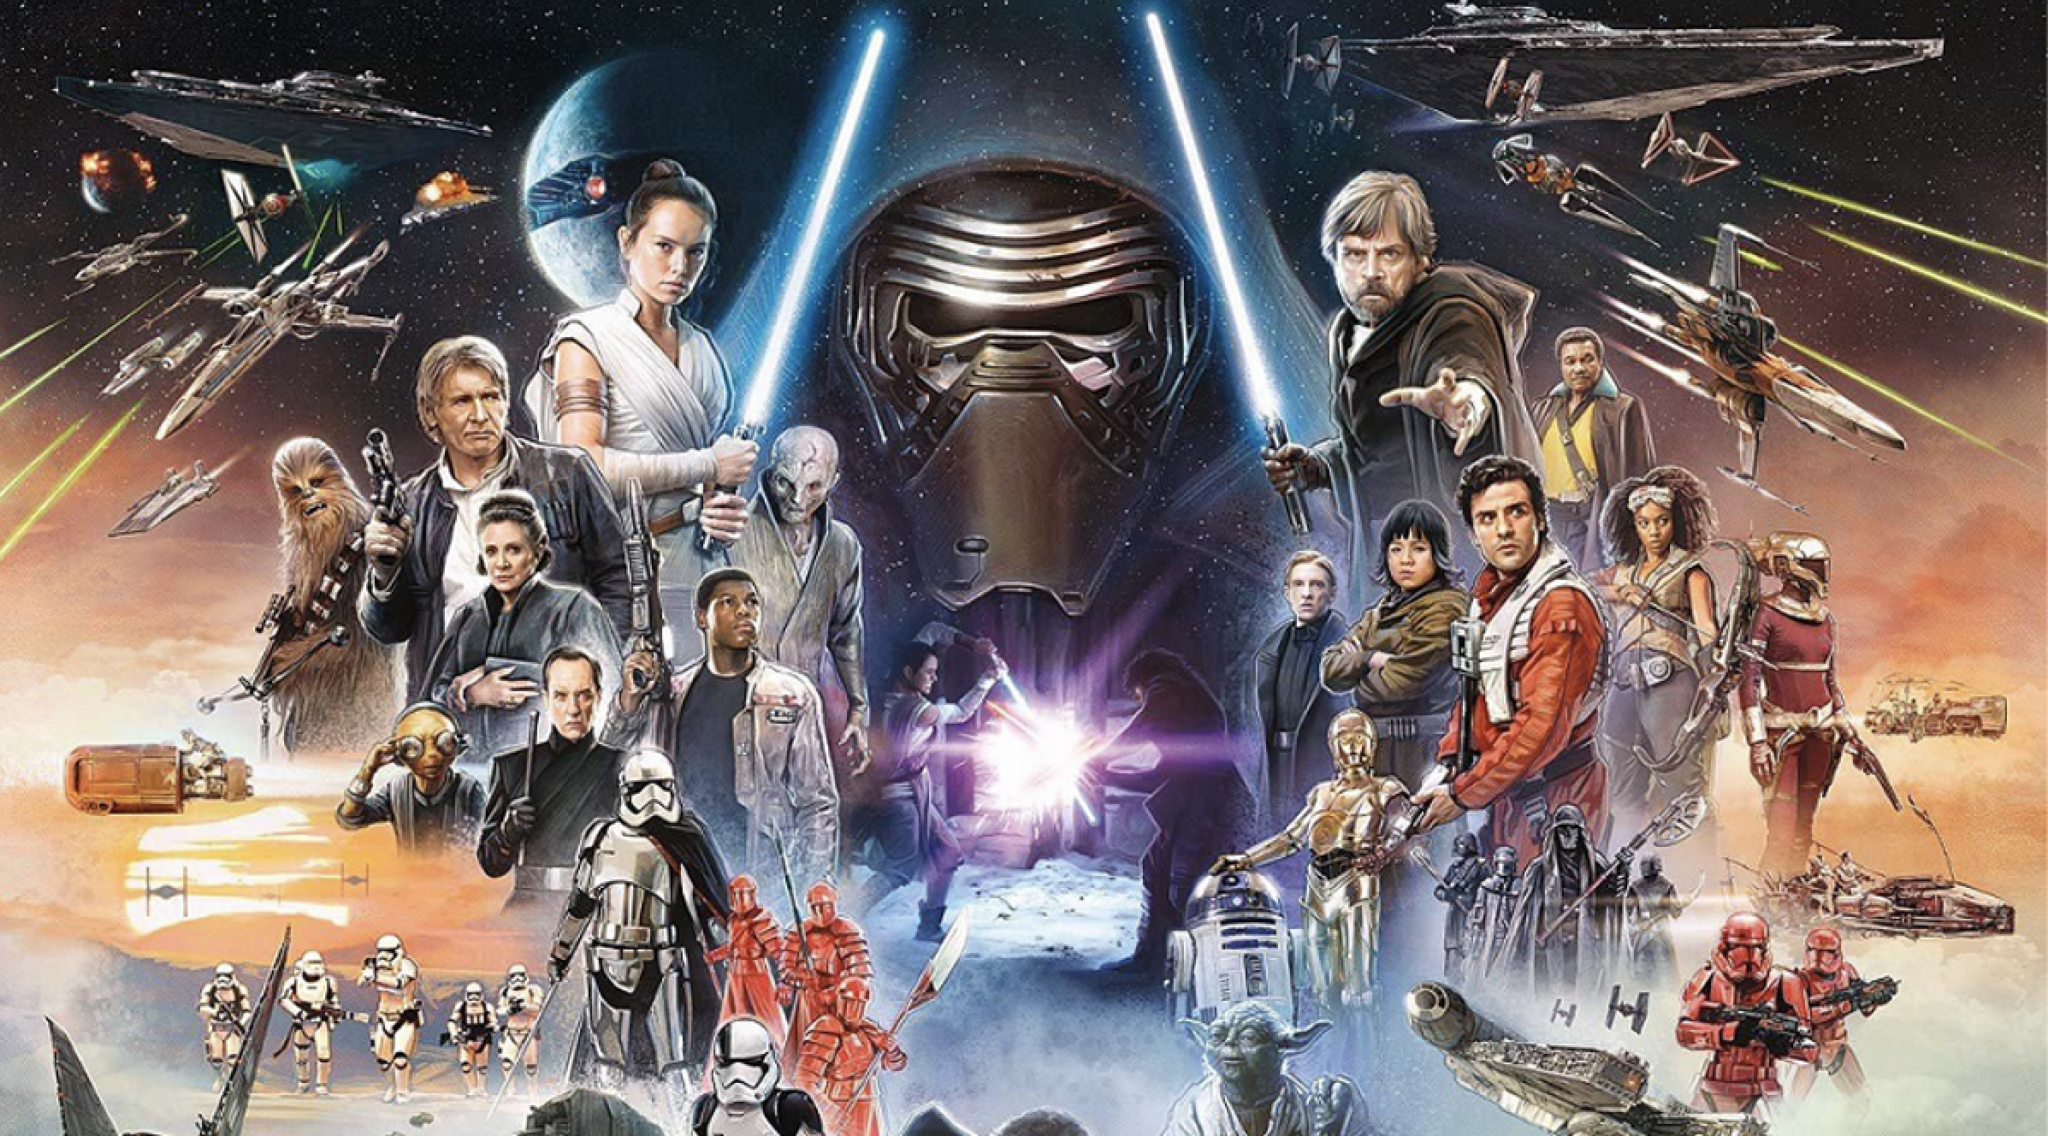 Fans Petition for Lucasfilm to Remake the ‘Star Wars’ Sequels